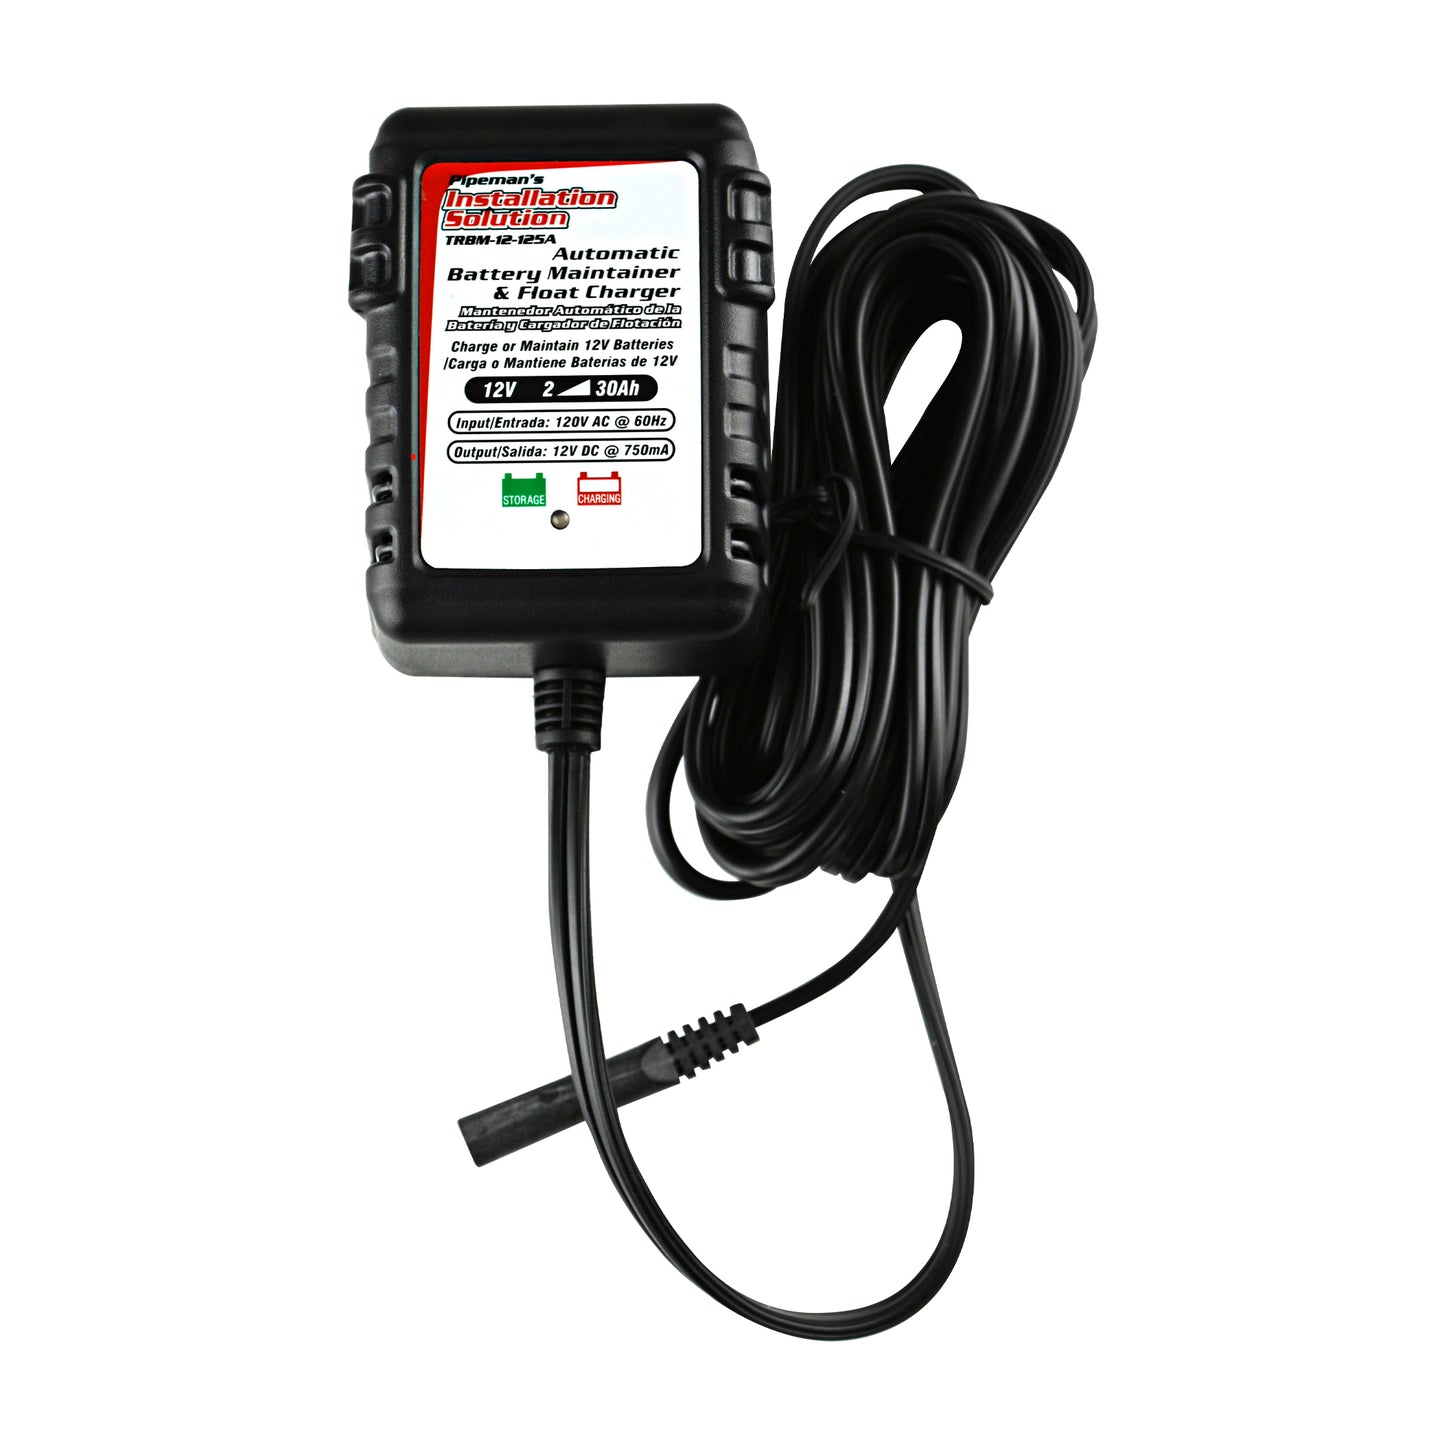 TRBM-12-125A - Automatic Battery Maintainer & Float Charger